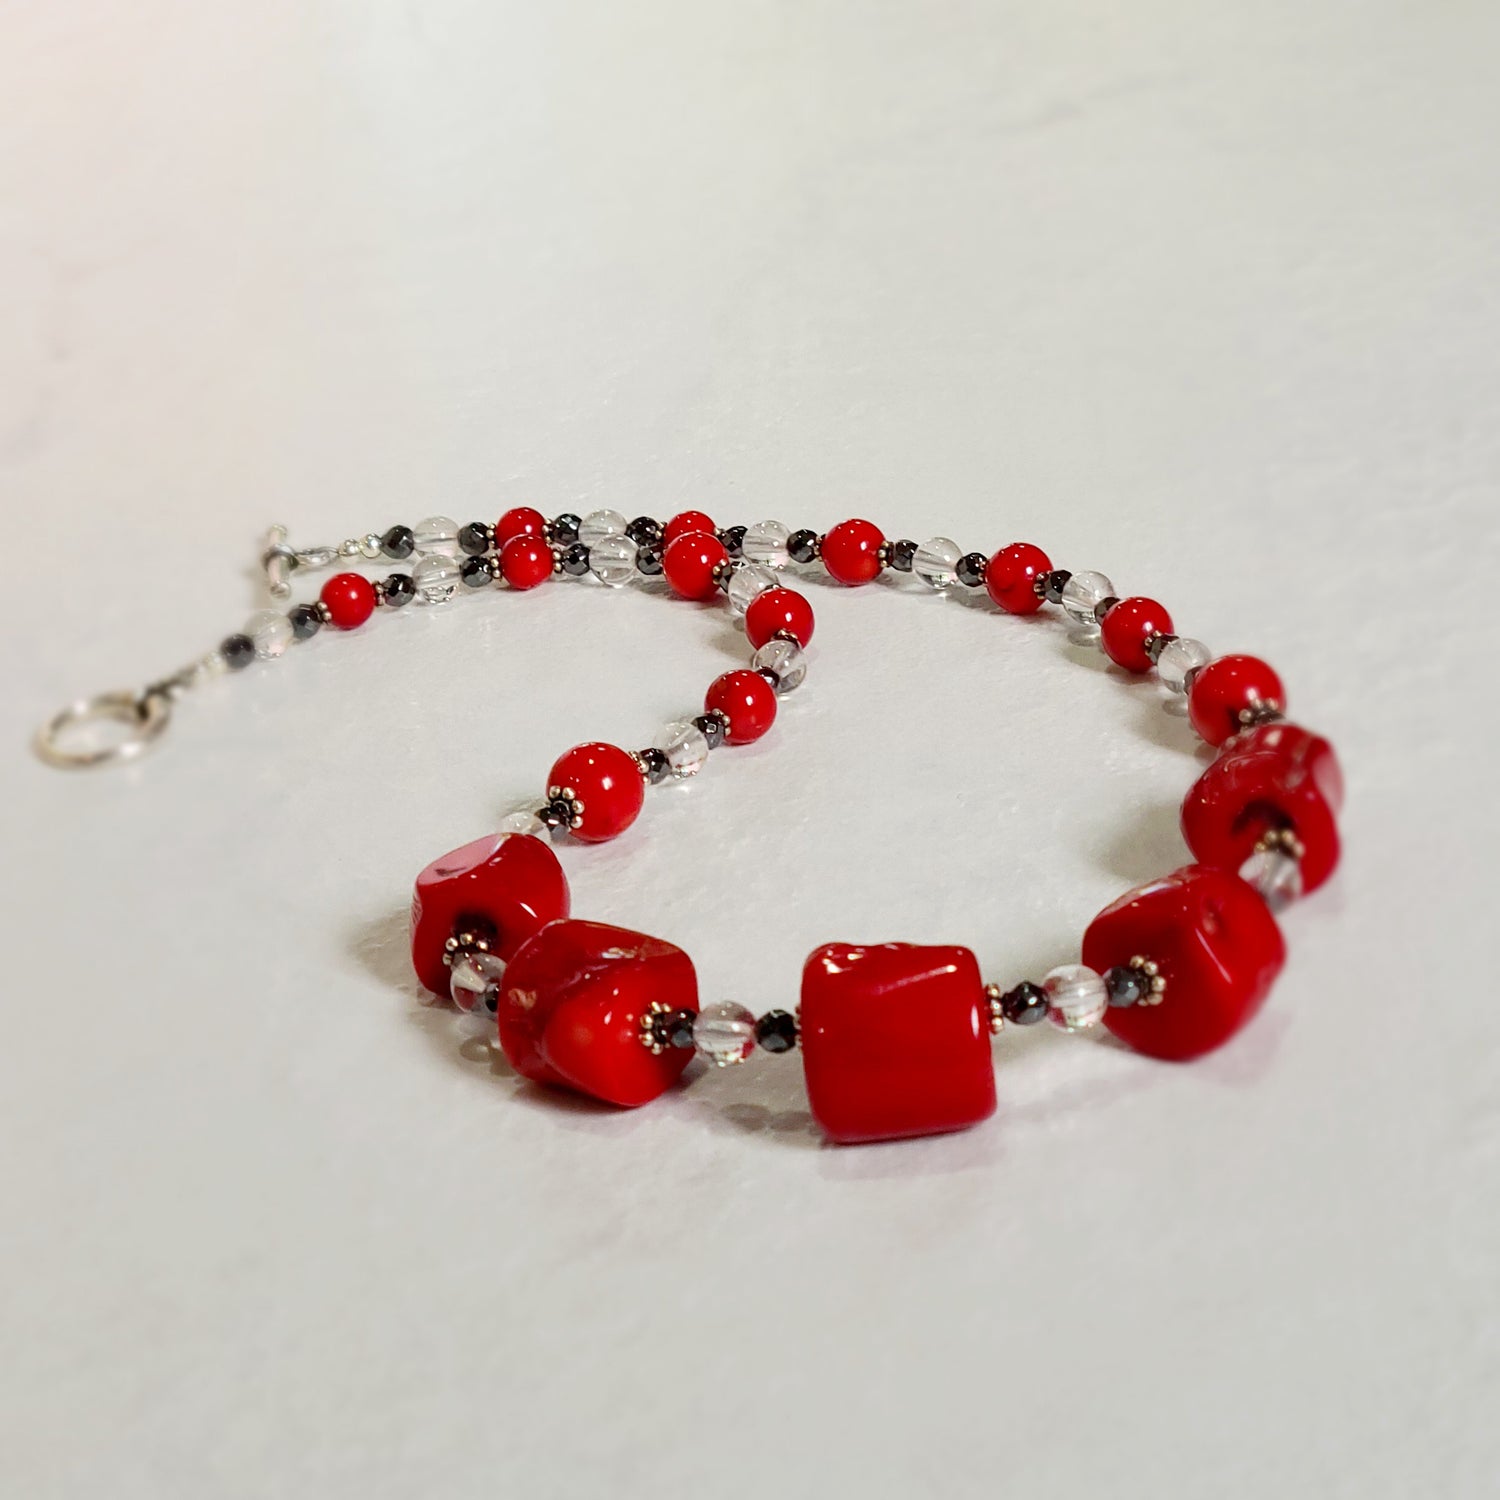 Red Sea Bamboo and Crystal Quartz Necklace